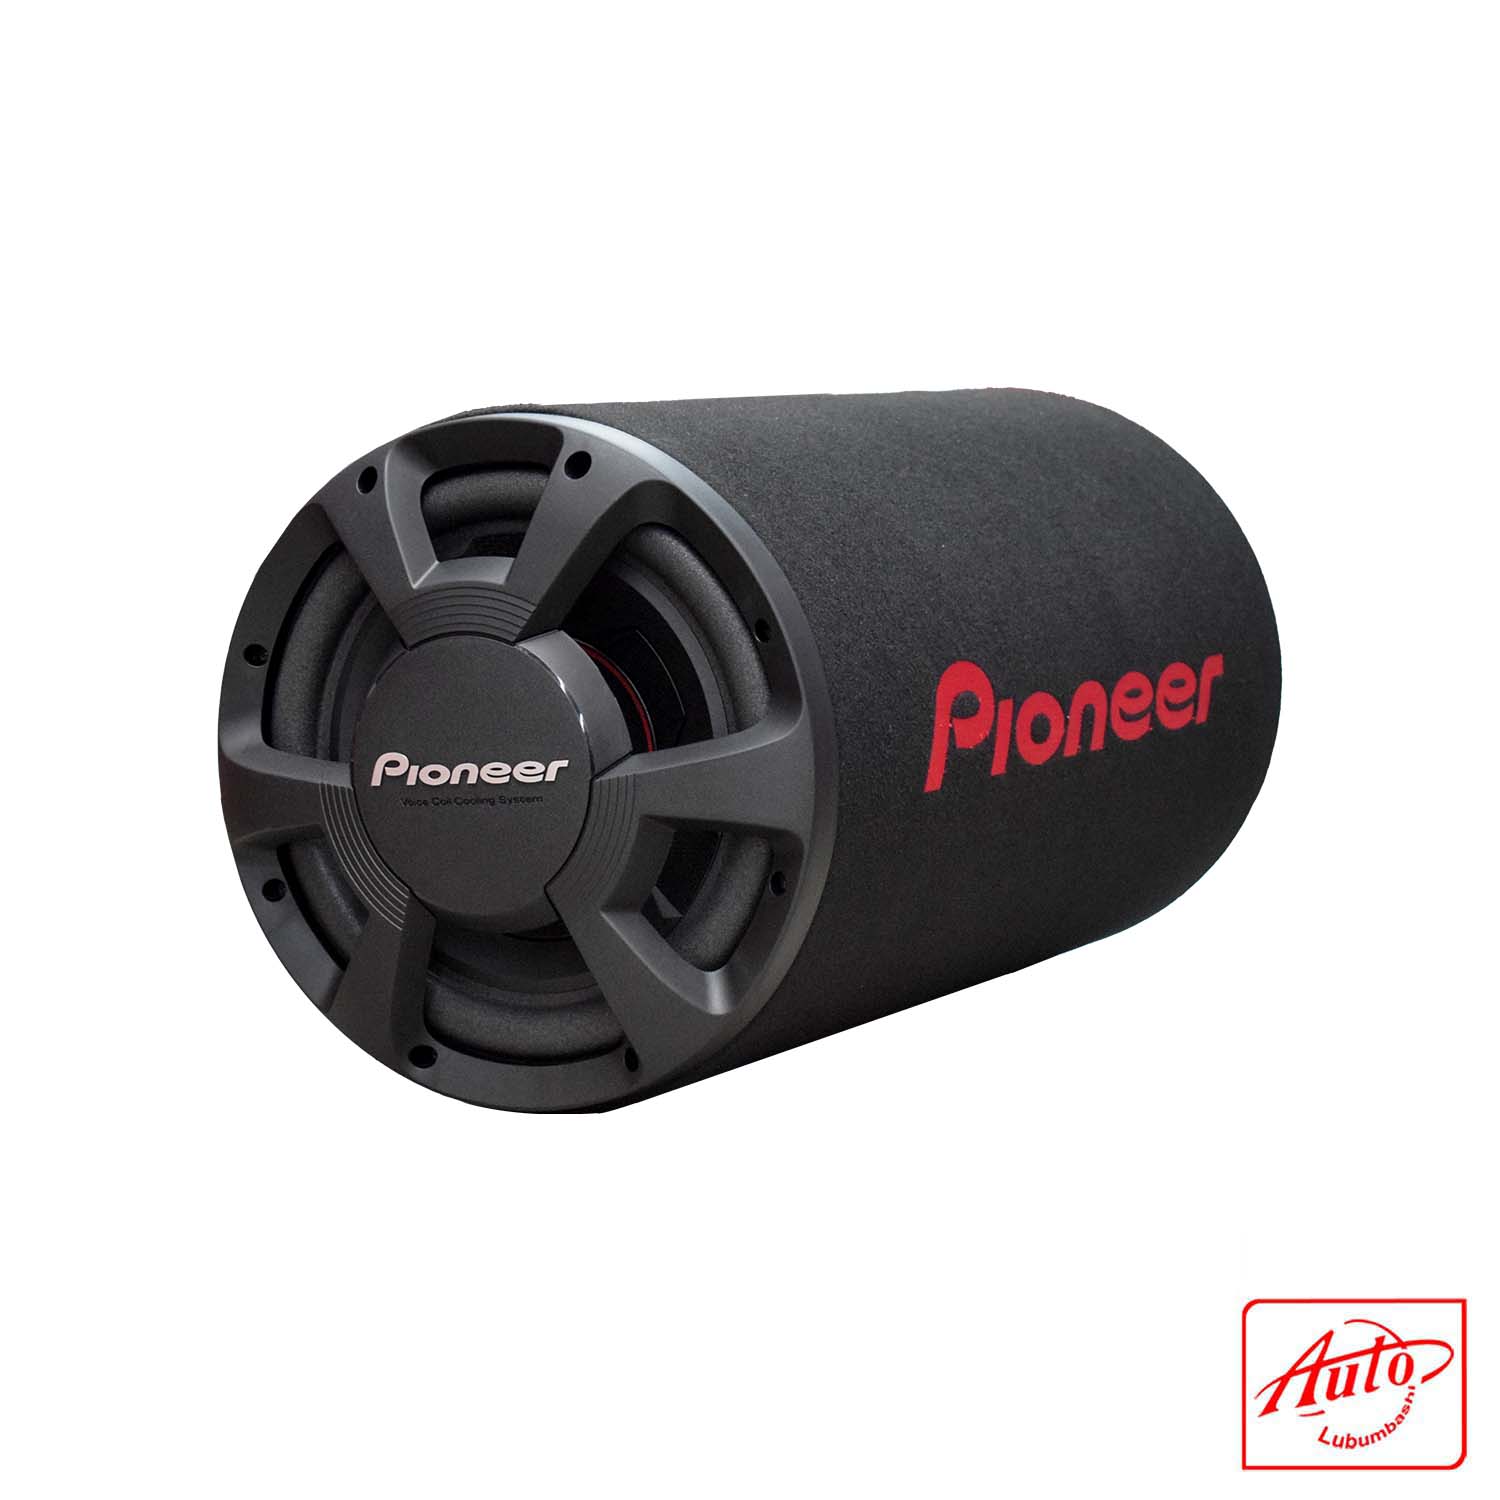 30CM SUBWOOFER PRE-LOADED IN BASS-REFLEX TUBE ENCLOSURE (1300W) - PIONEER